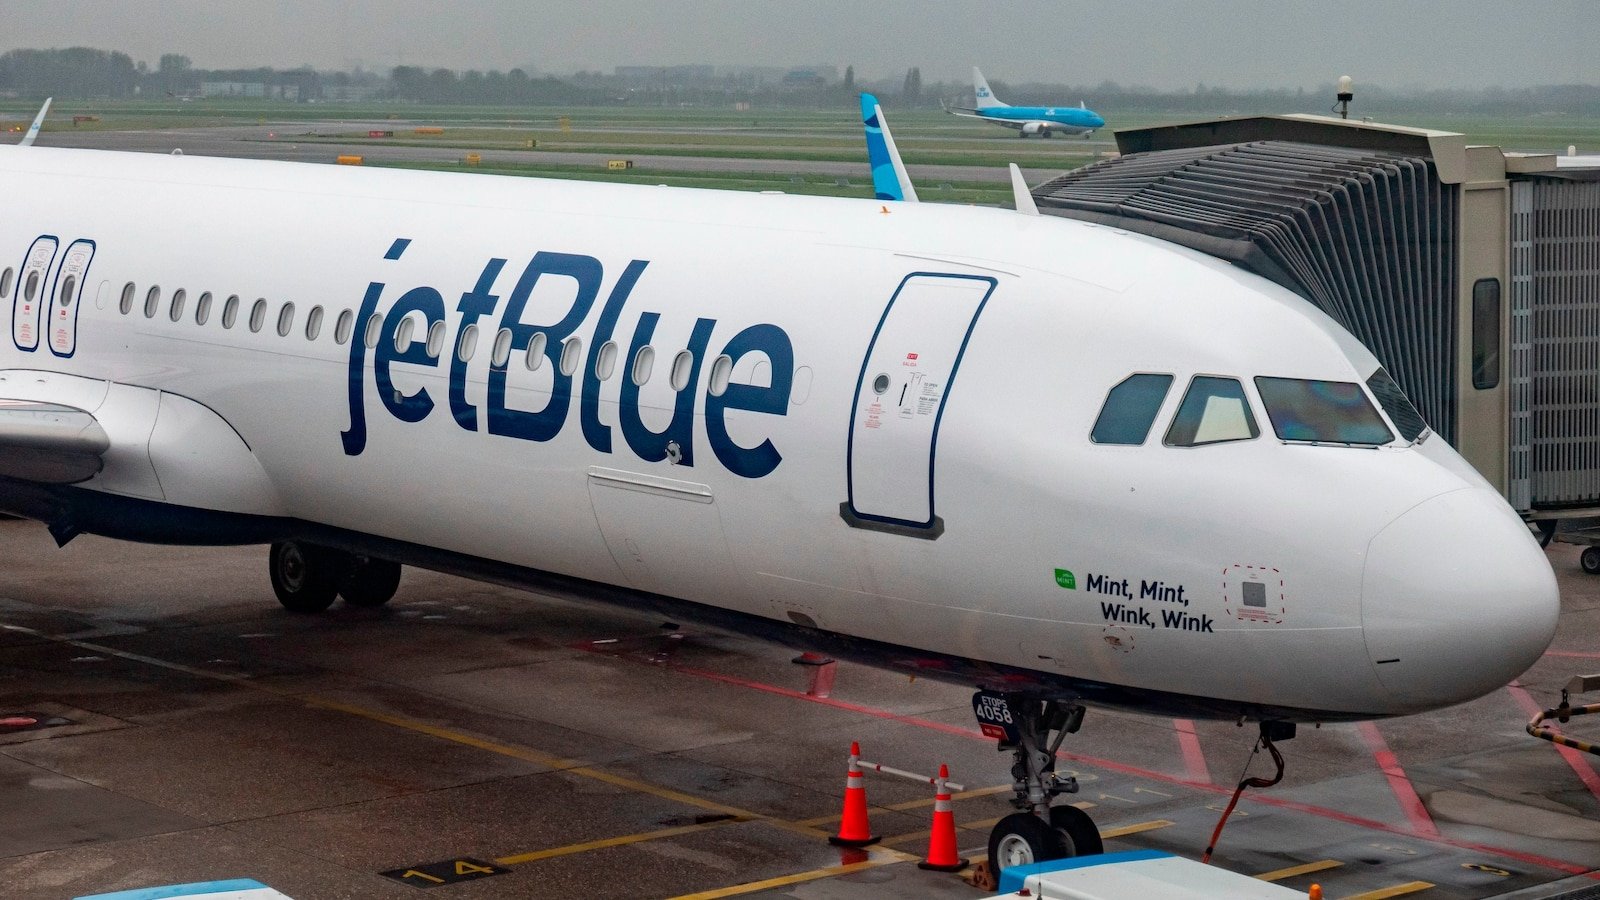 JetBlue passenger alleges severe burns due to hot tea served amid turbulence